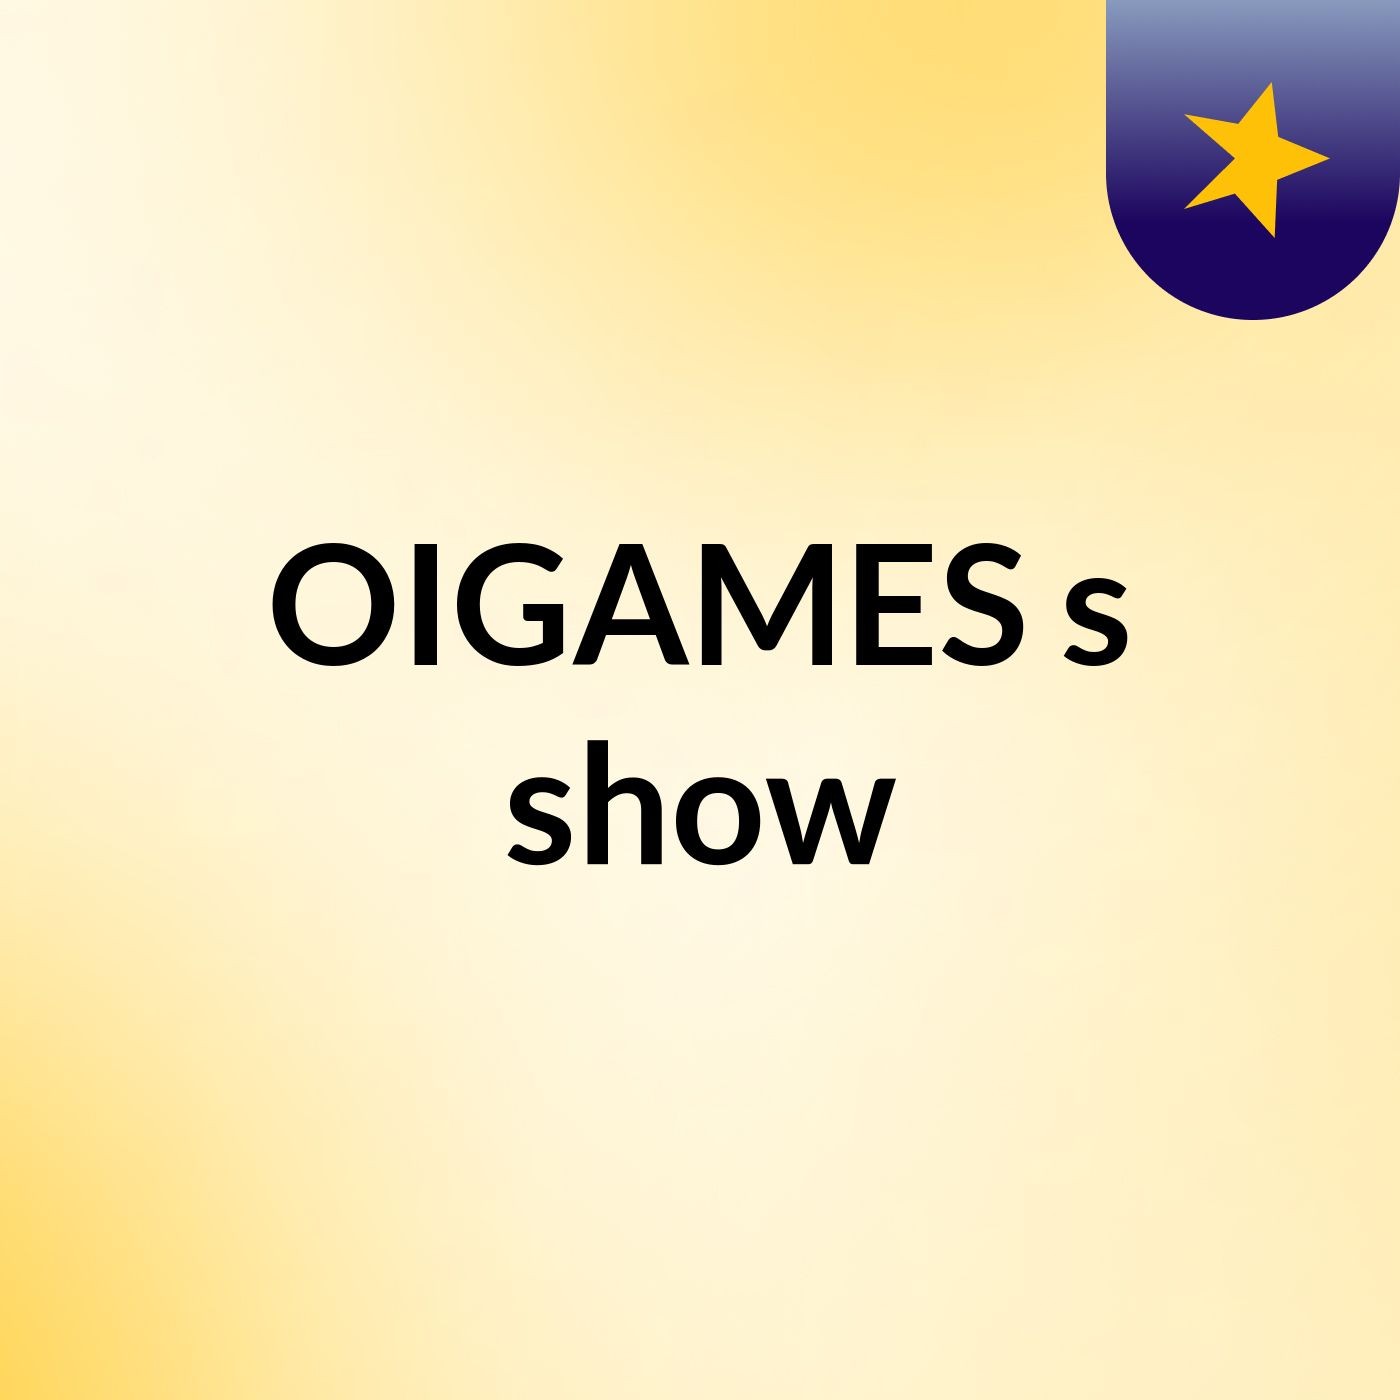 OIGAMES's show